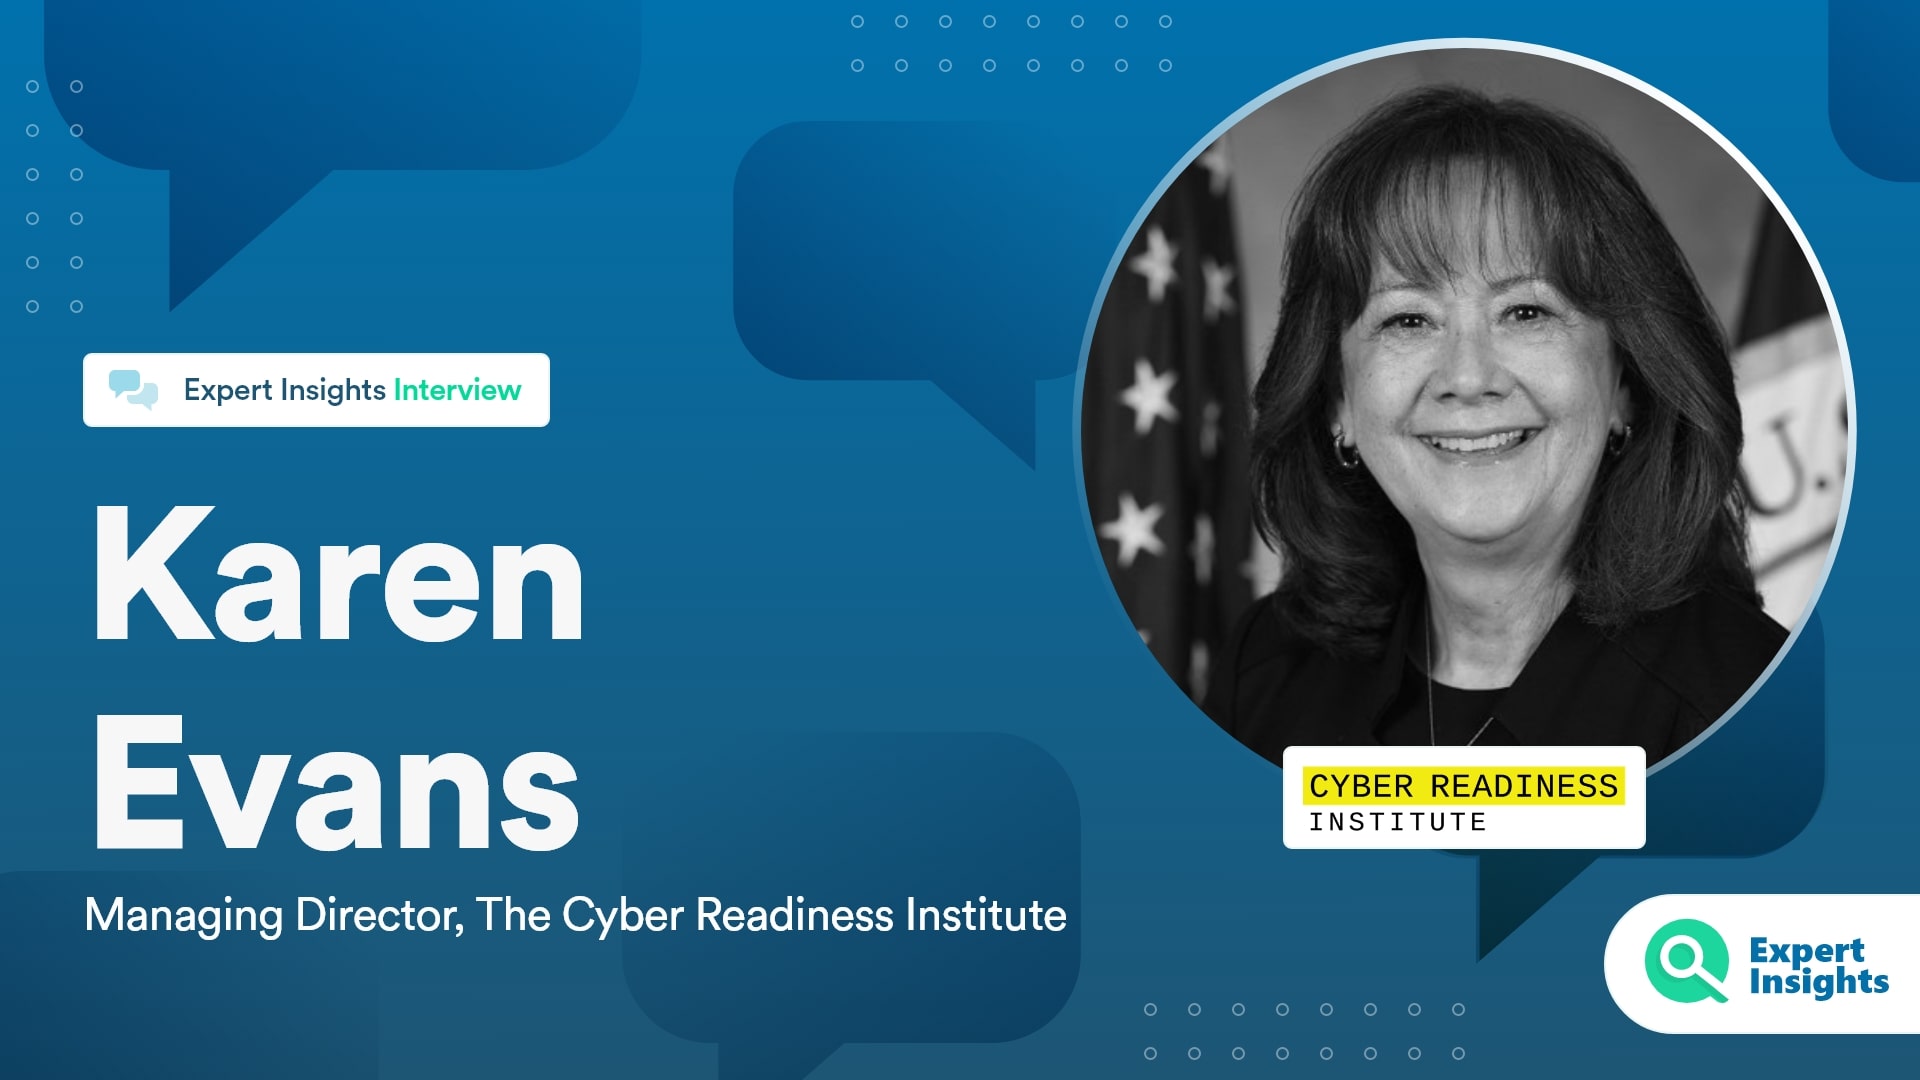 Expert Insights Interview With Karen Evans Of The Cyber Readiness Institute